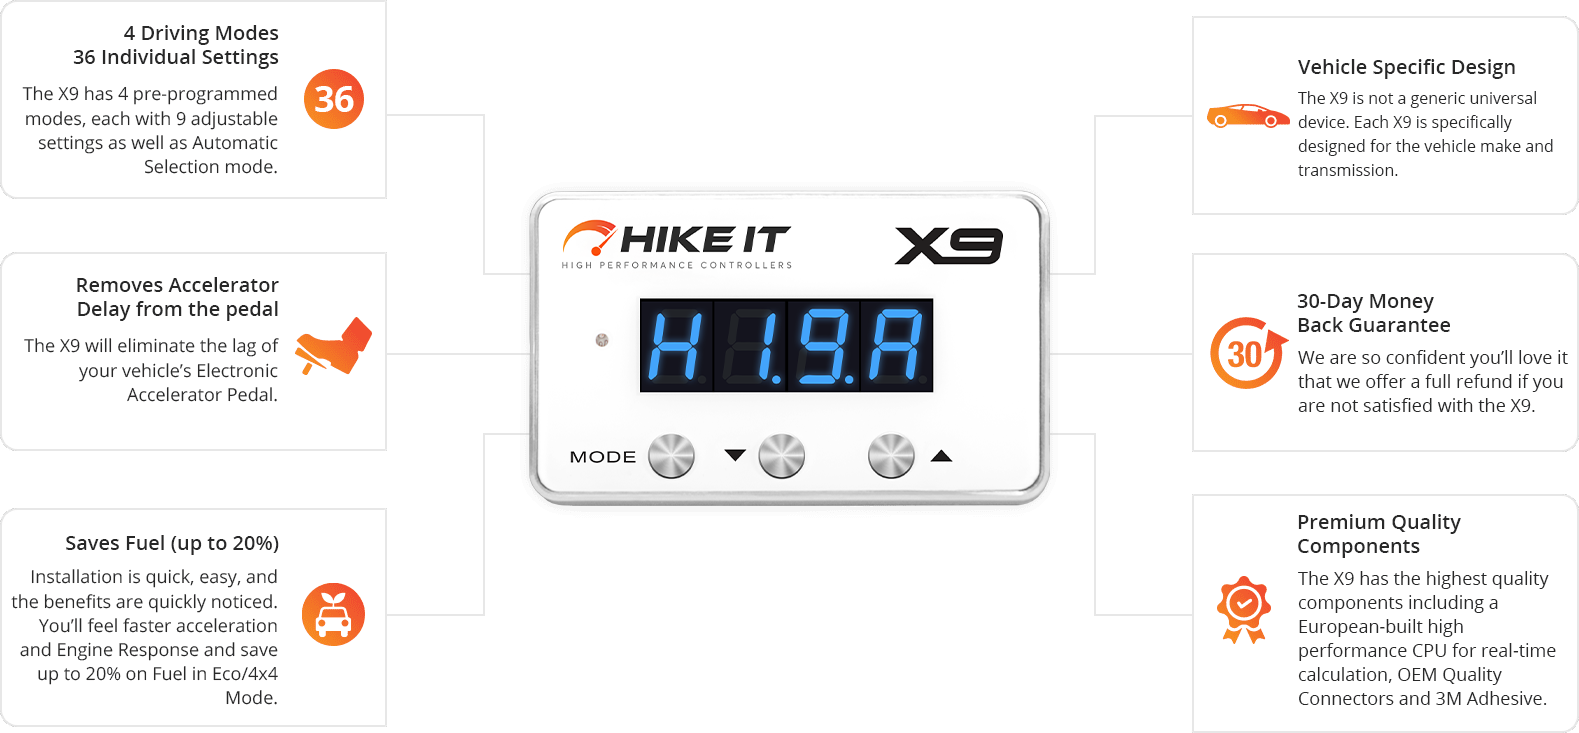 HIKEIT THROTTLE CONTROLLER FOR HAVAL - REEL 'N' DEAL TACKLE